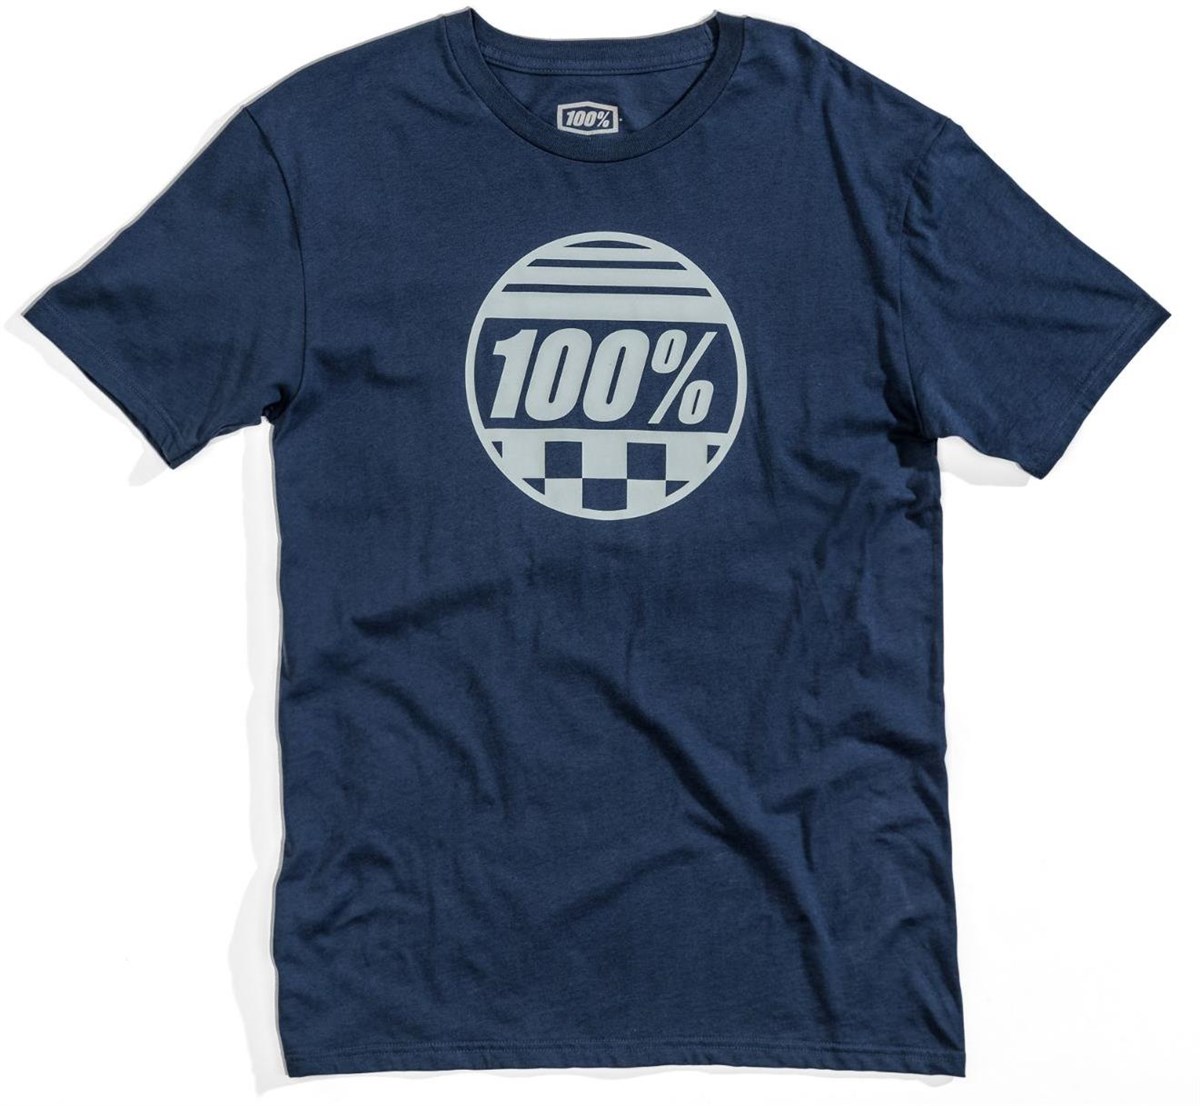 100% Sector T-Shirt product image